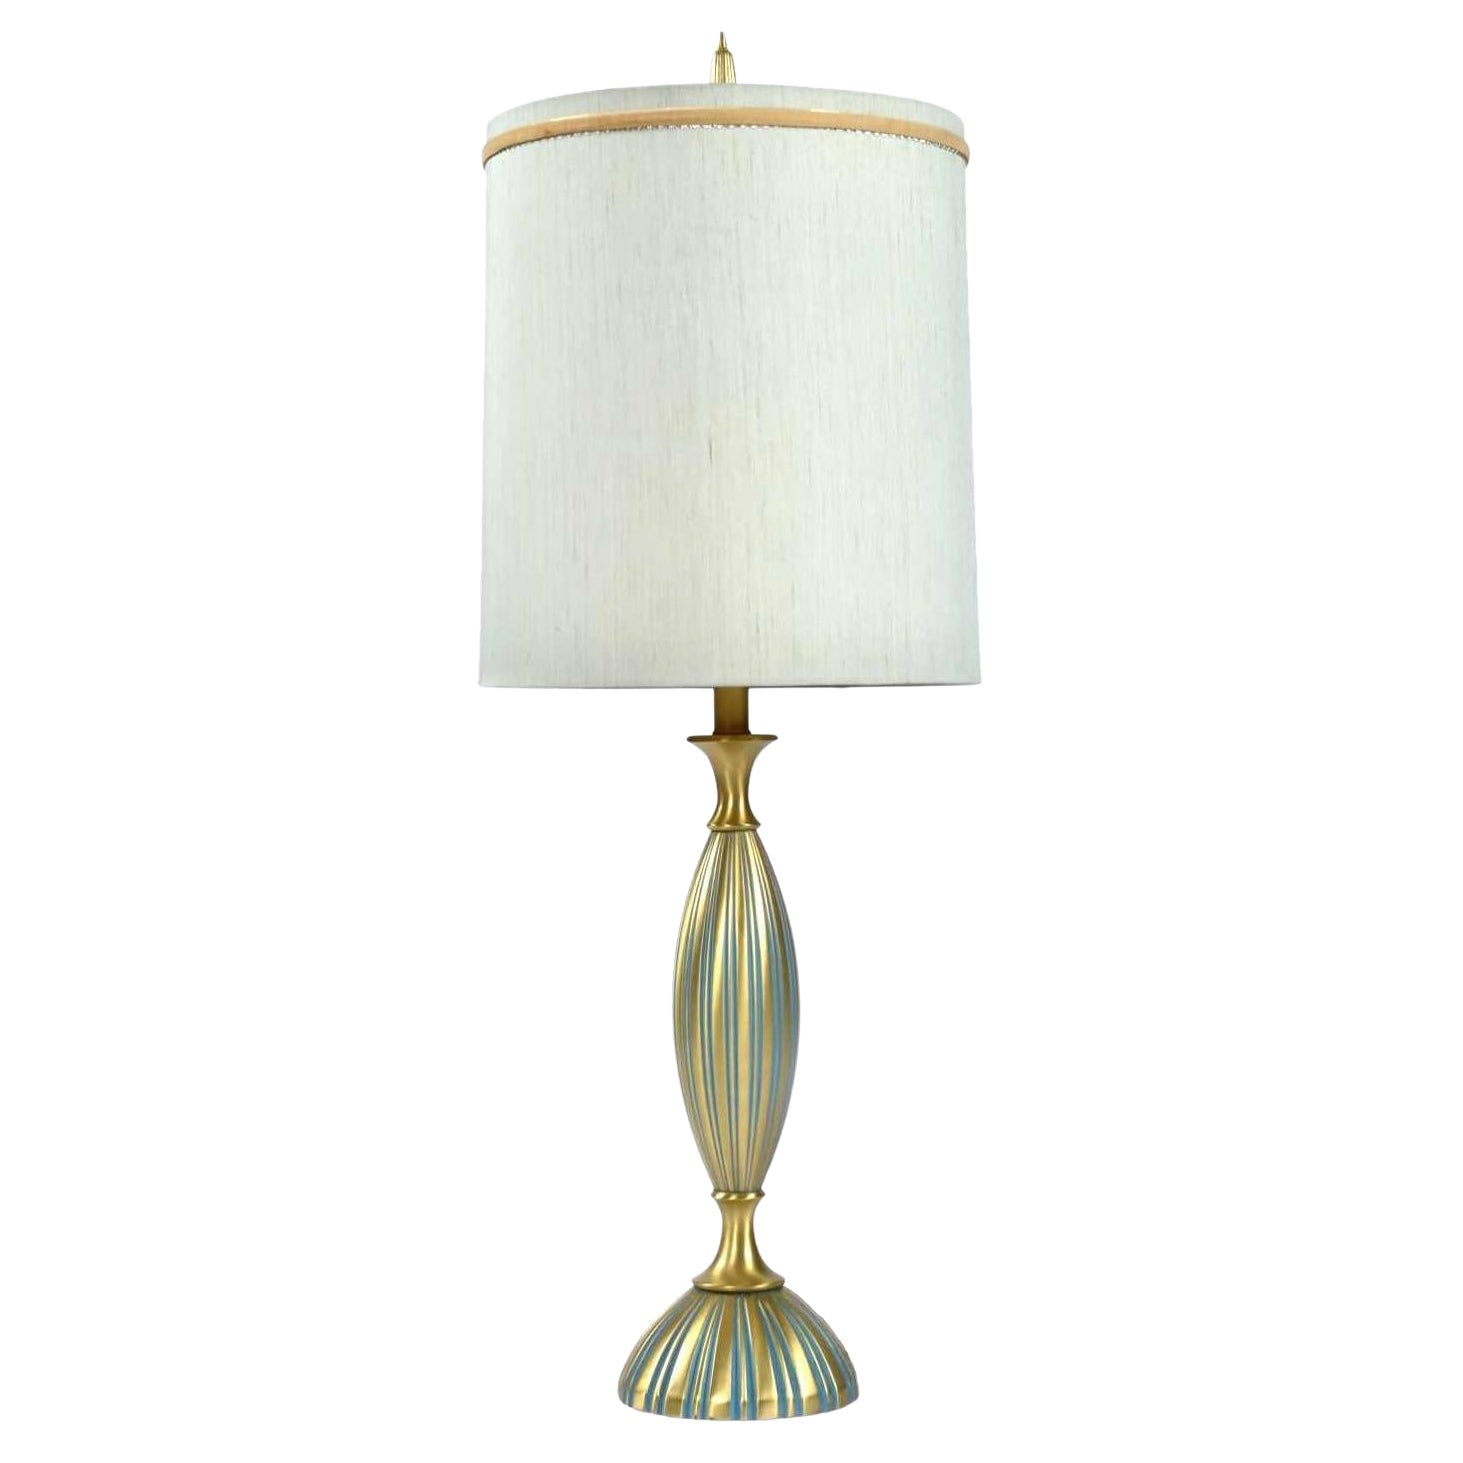 Rembrandt Teal and Gold Hourglass Shaped Midcentury Table Lamp For Sale